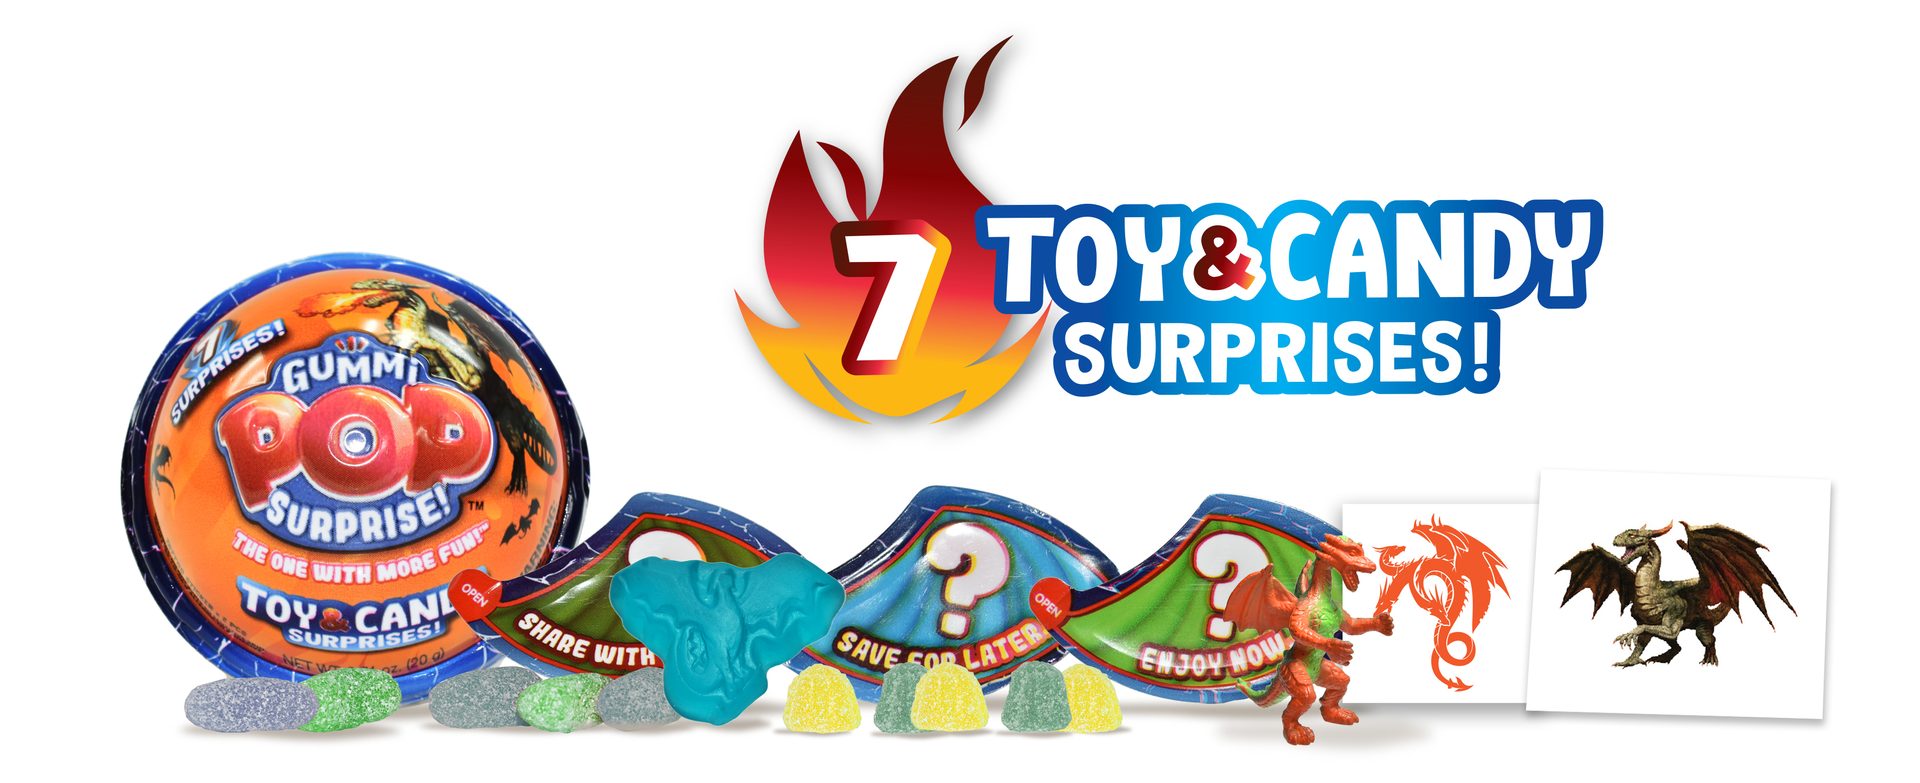 Font, Toy surprise, Dragons, Gummy candy